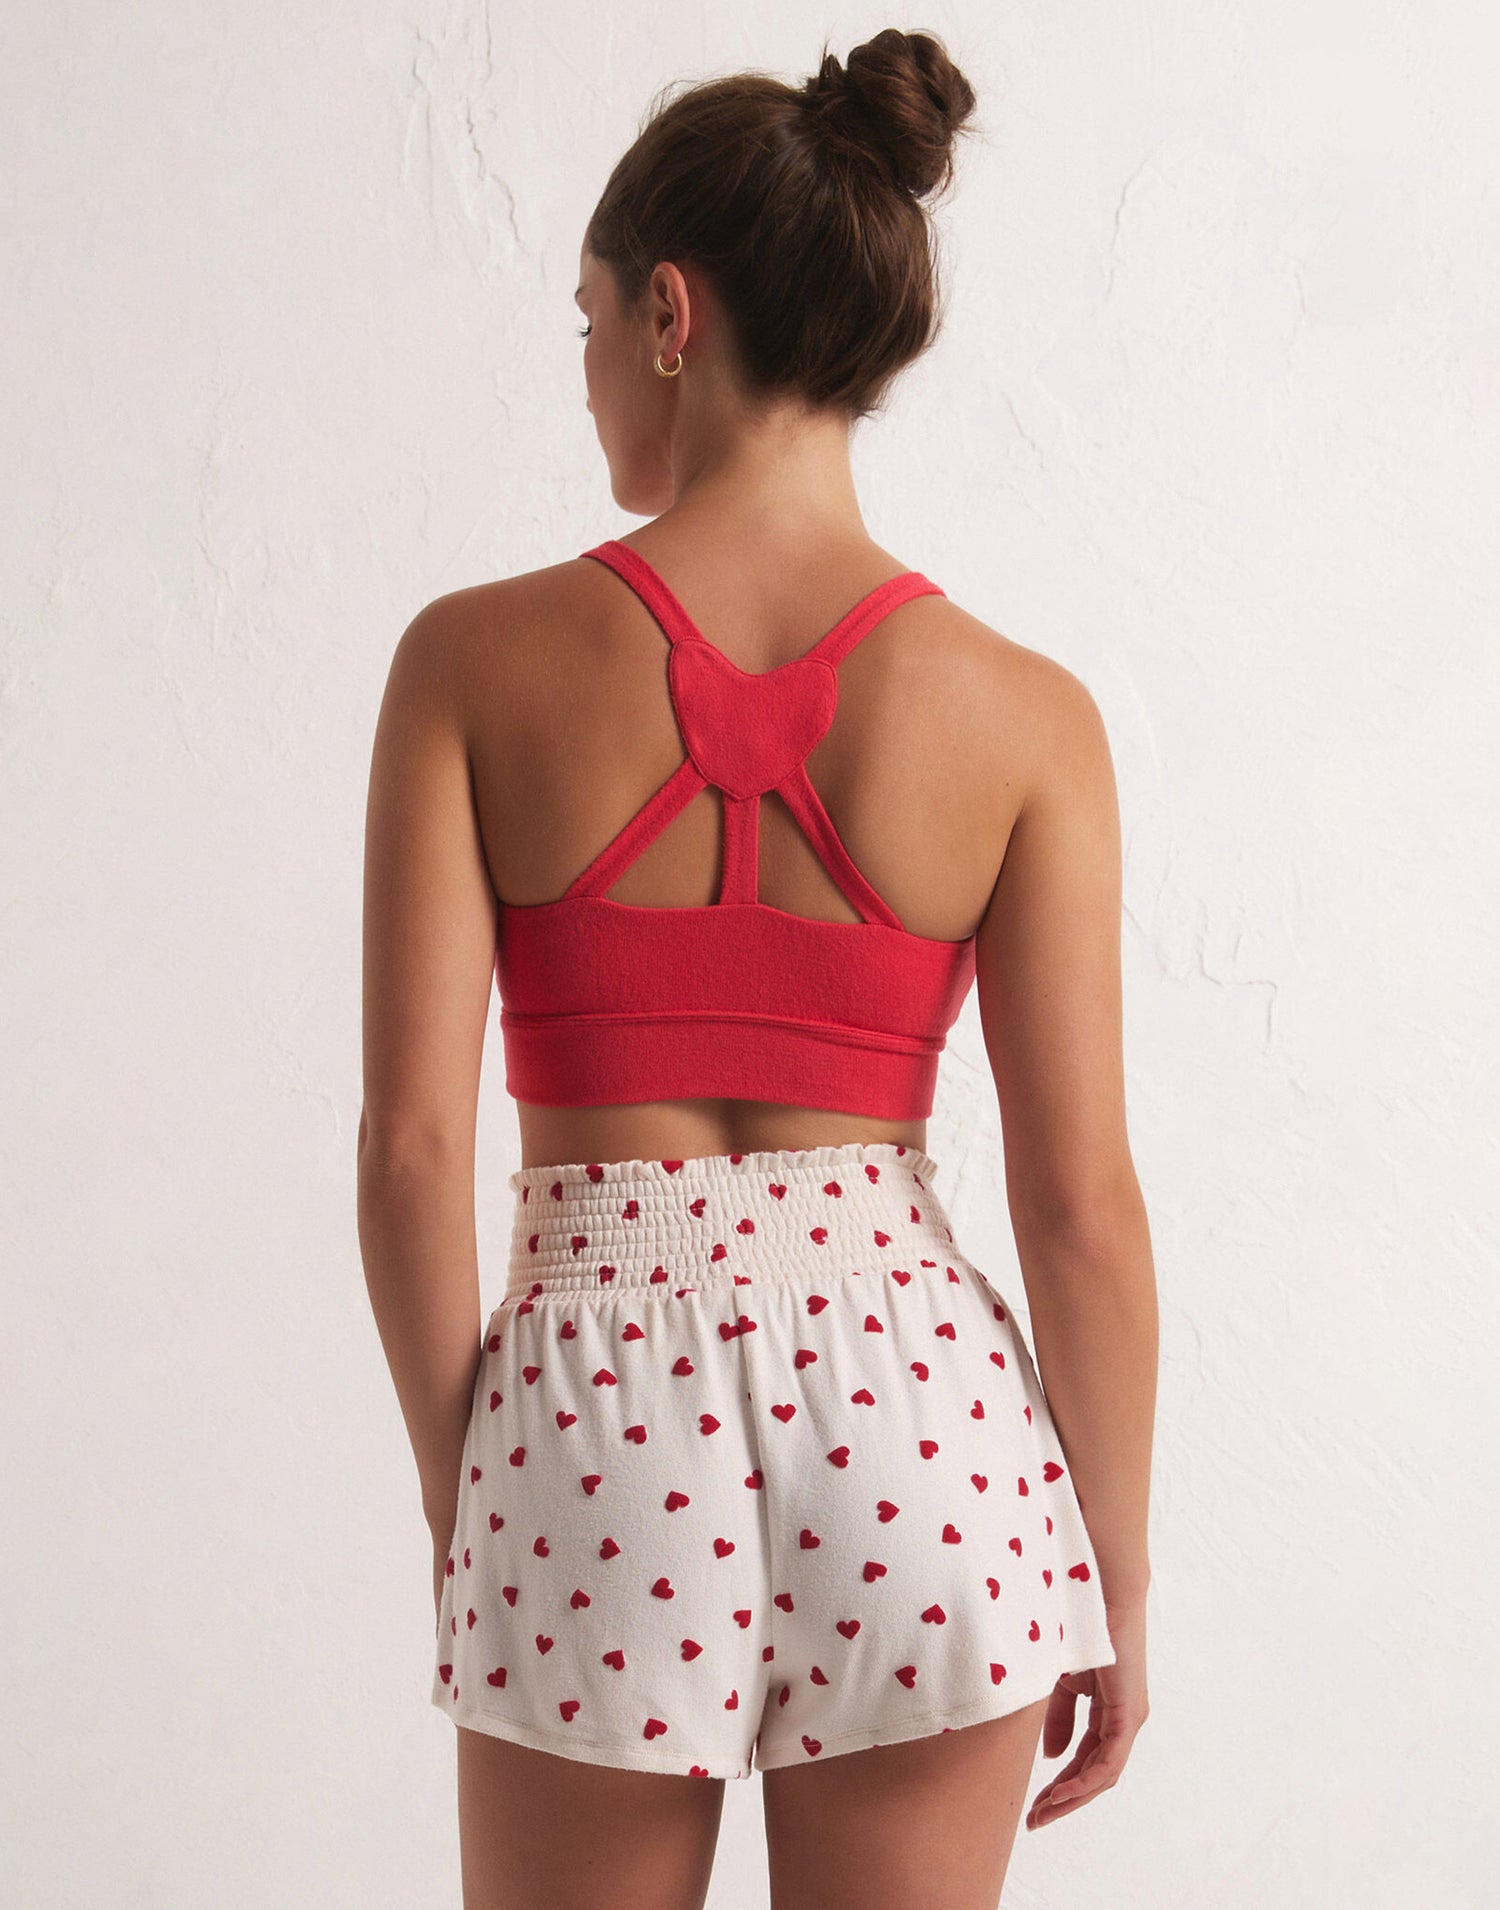 Spread Love Lounge Tank Bra by Z Supply in Candy Red - Back View